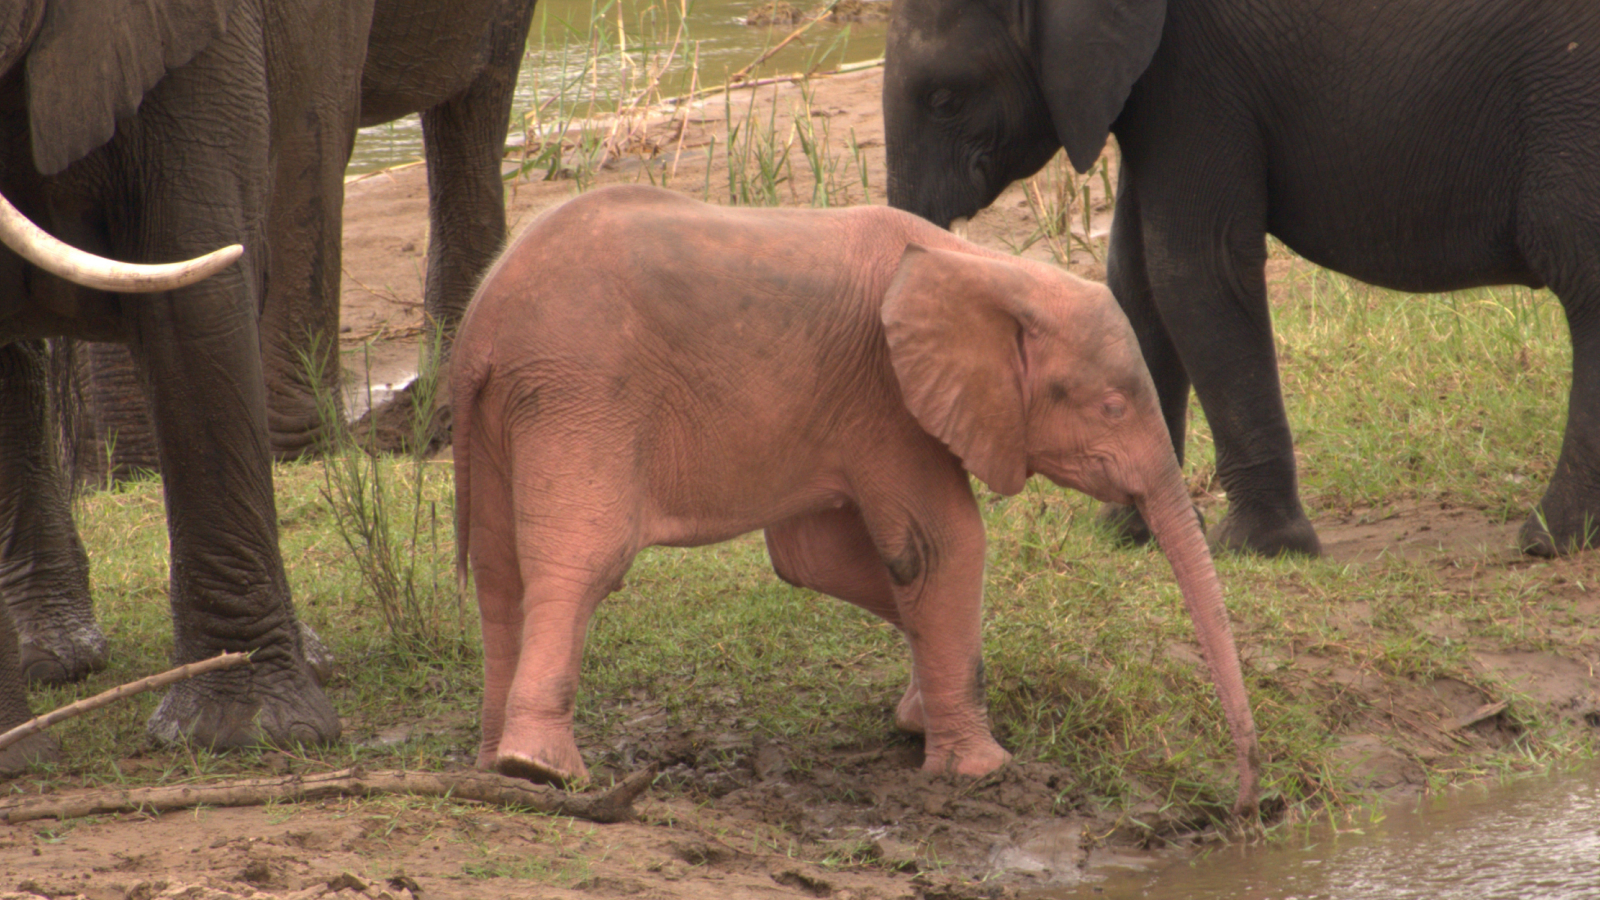 Why are some baby elephants pink?